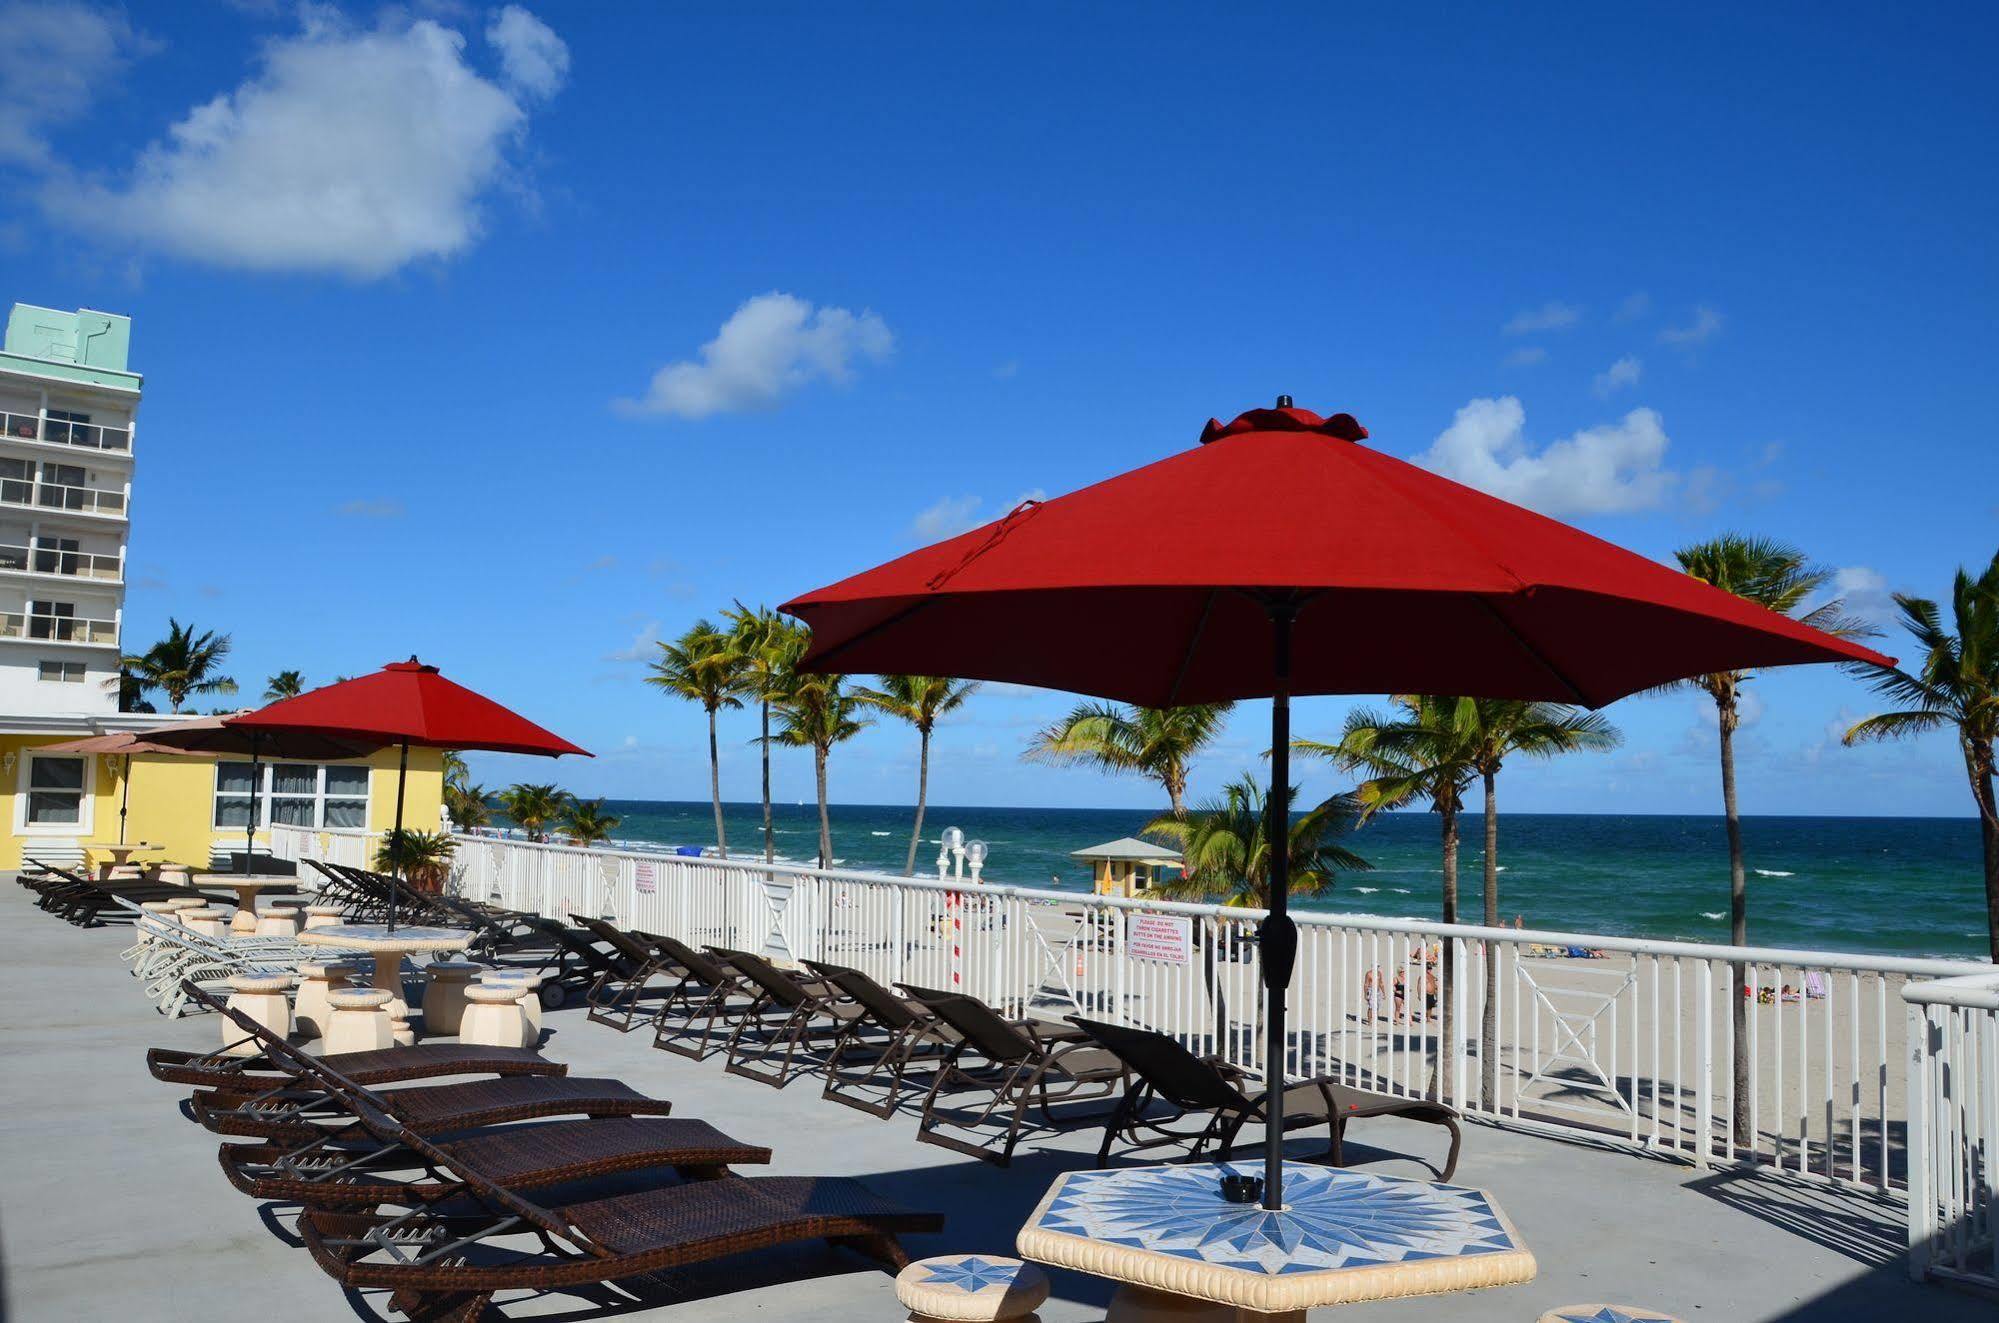 HOTEL LA TERRACE OCEANFRONT HOLLYWOOD, FL 3* (United States) - from C$ 232  | iBOOKED